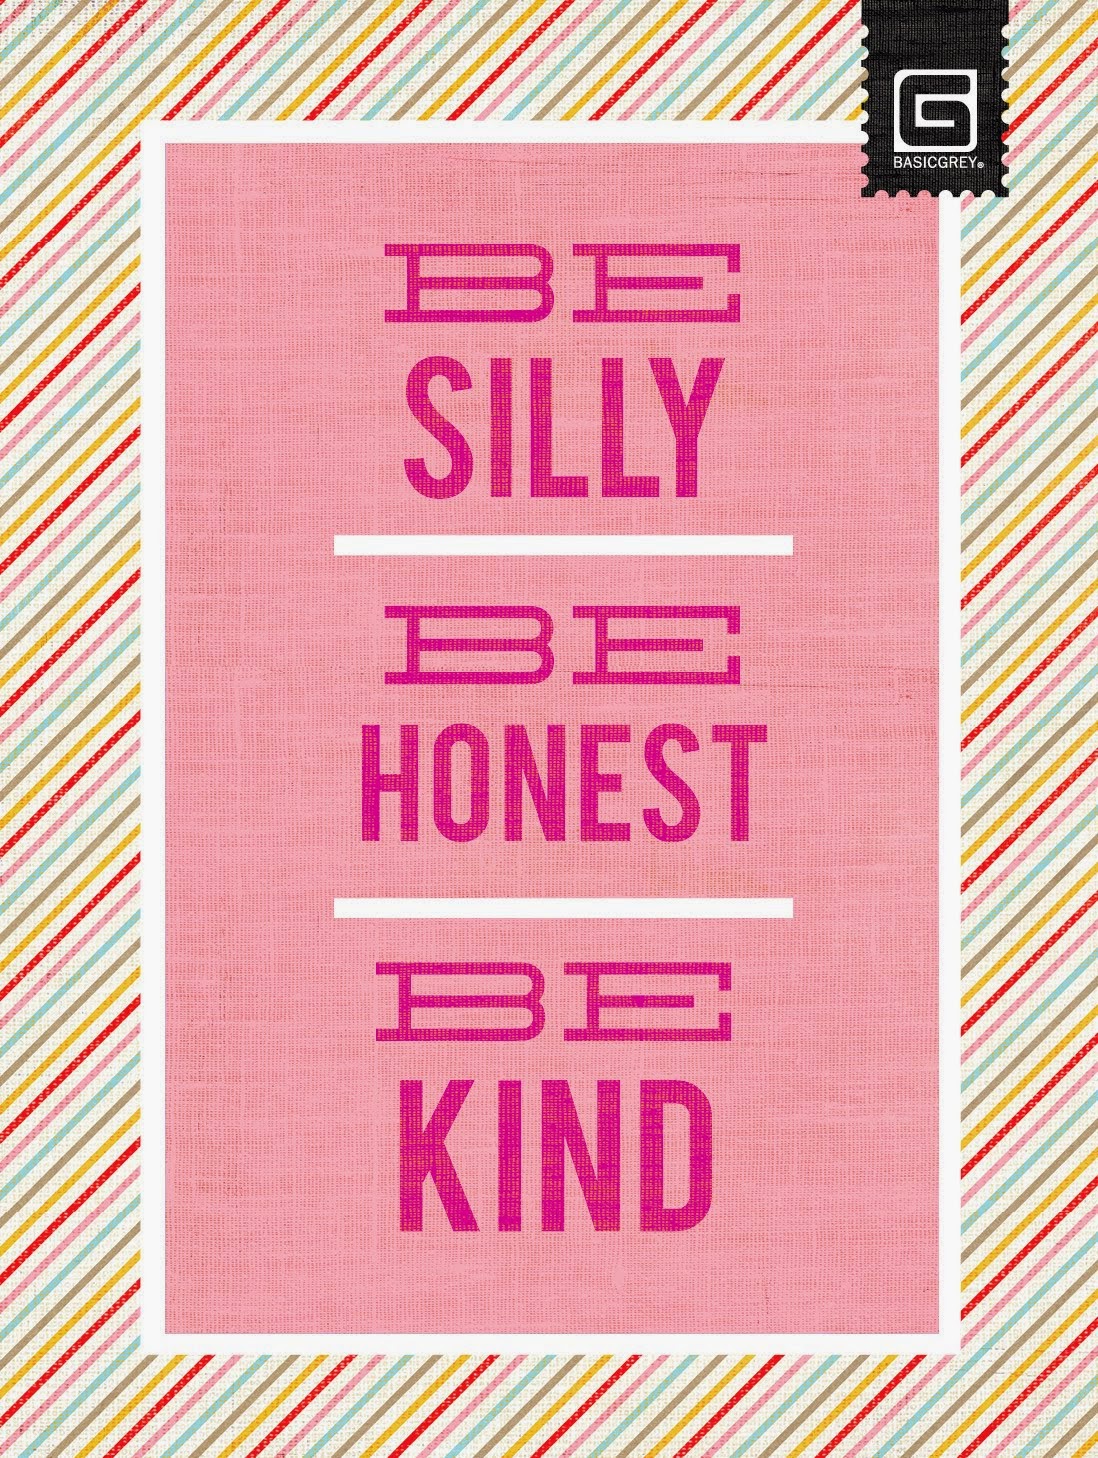 Be Kind!